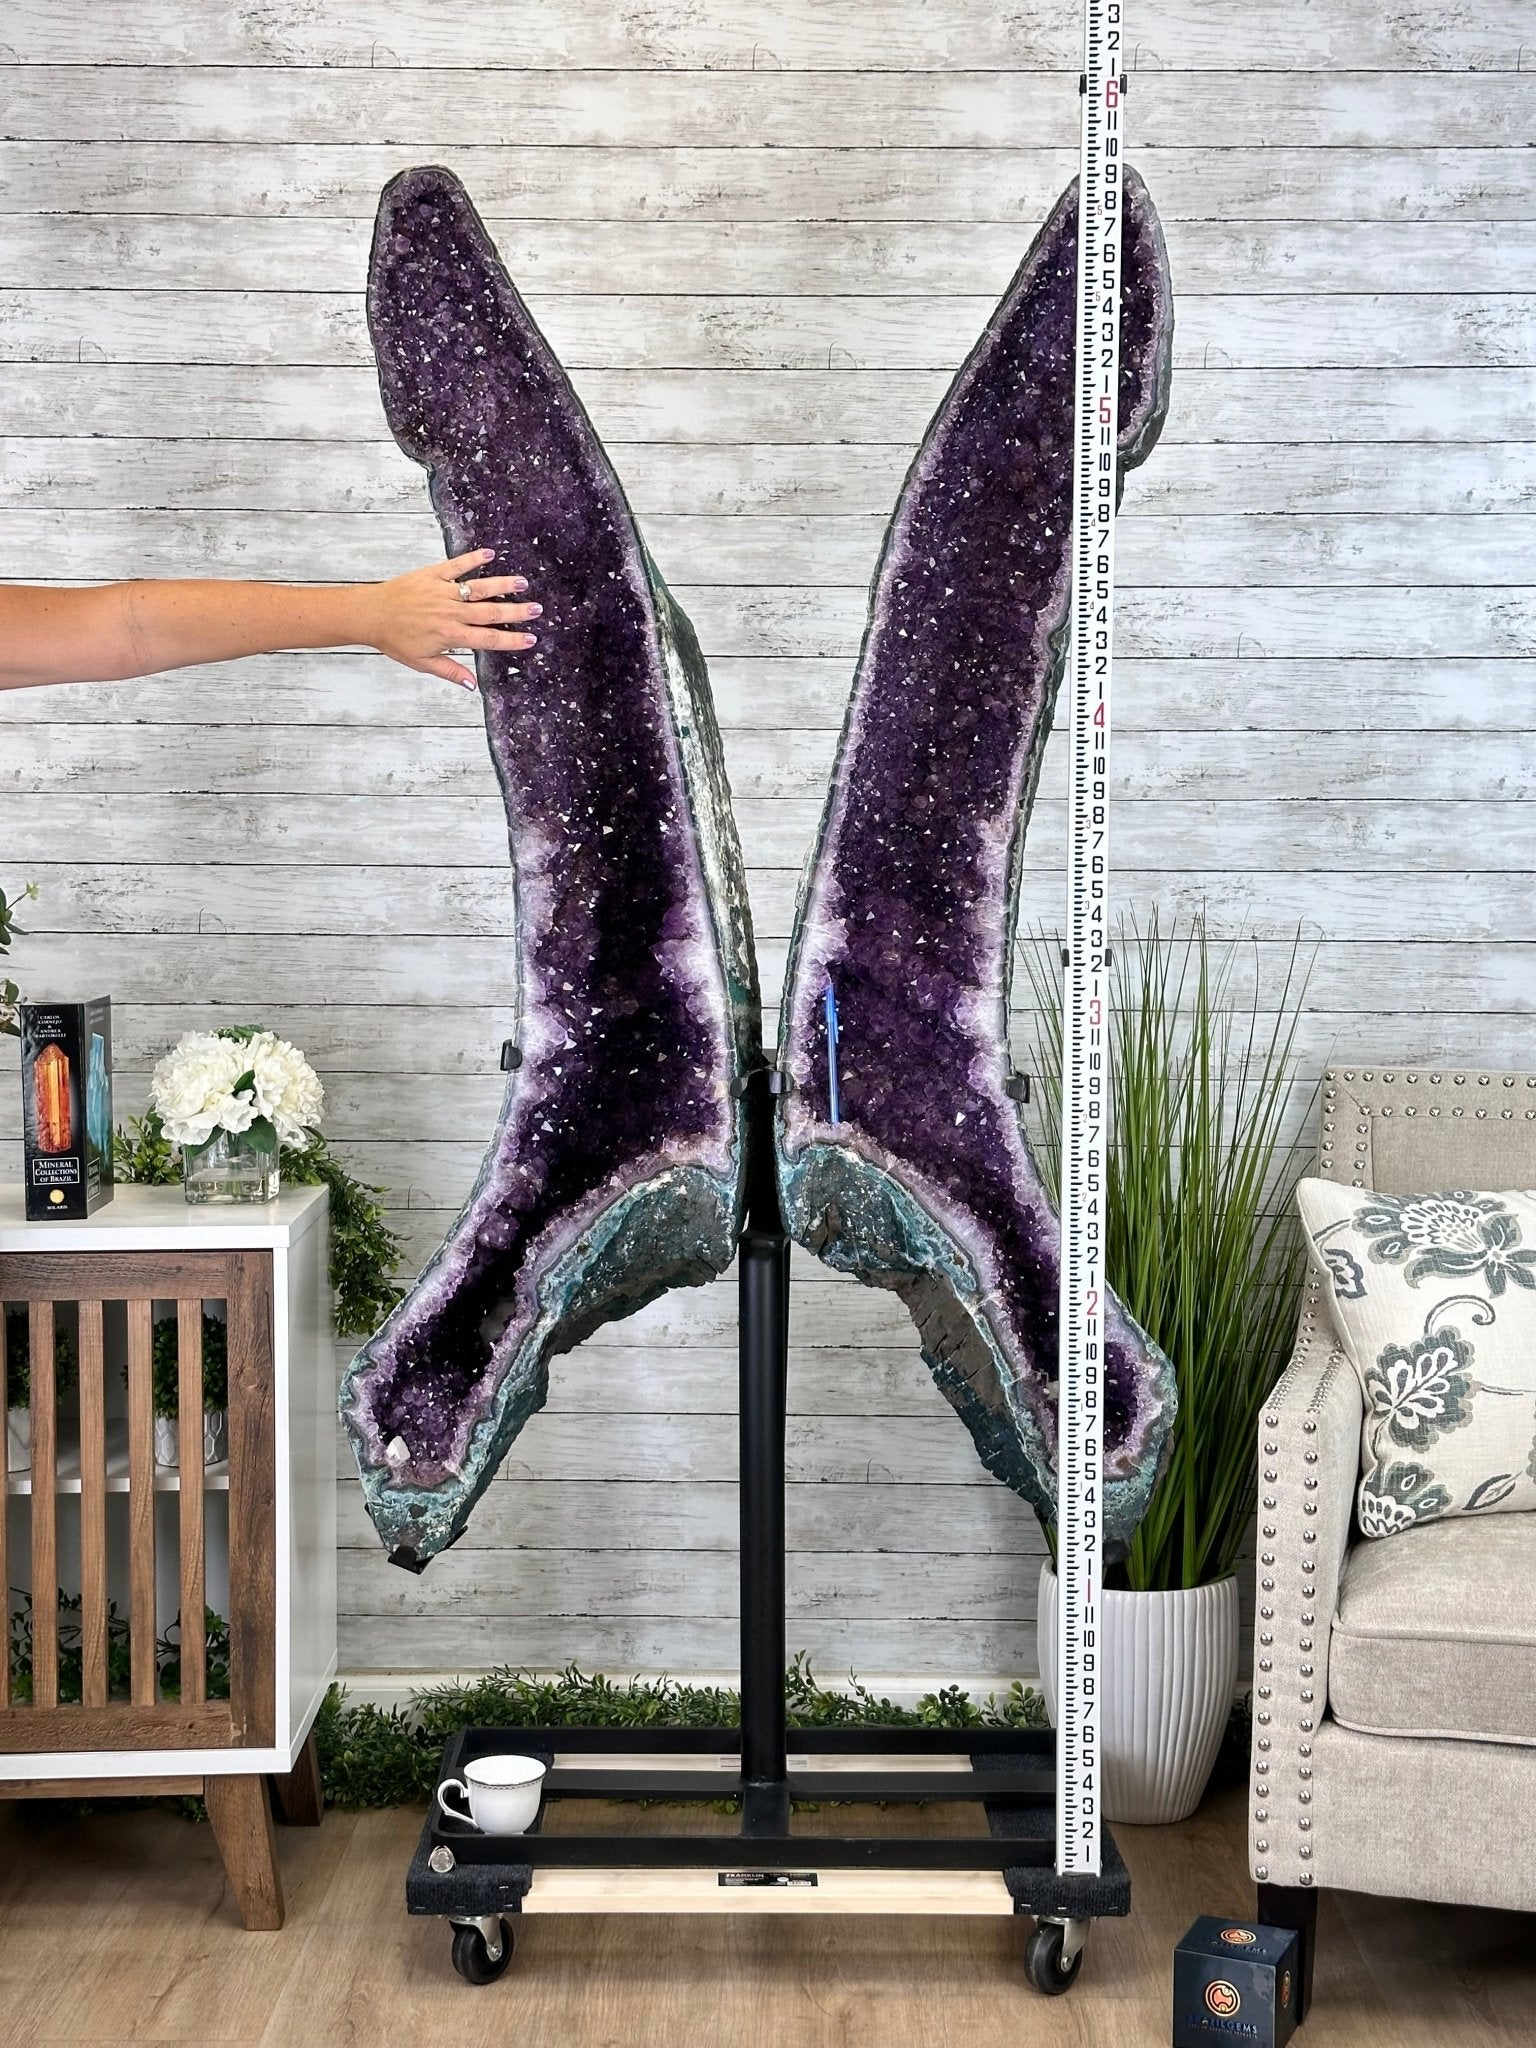 Extra Plus Quality Amethyst Butterfly Wings 311 lbs & 72" Tall #5493-0045 - Brazil GemsBrazil GemsExtra Plus Quality Amethyst Butterfly Wings 311 lbs & 72" Tall #5493-0045Amethyst Butterfly Wings5493-0045